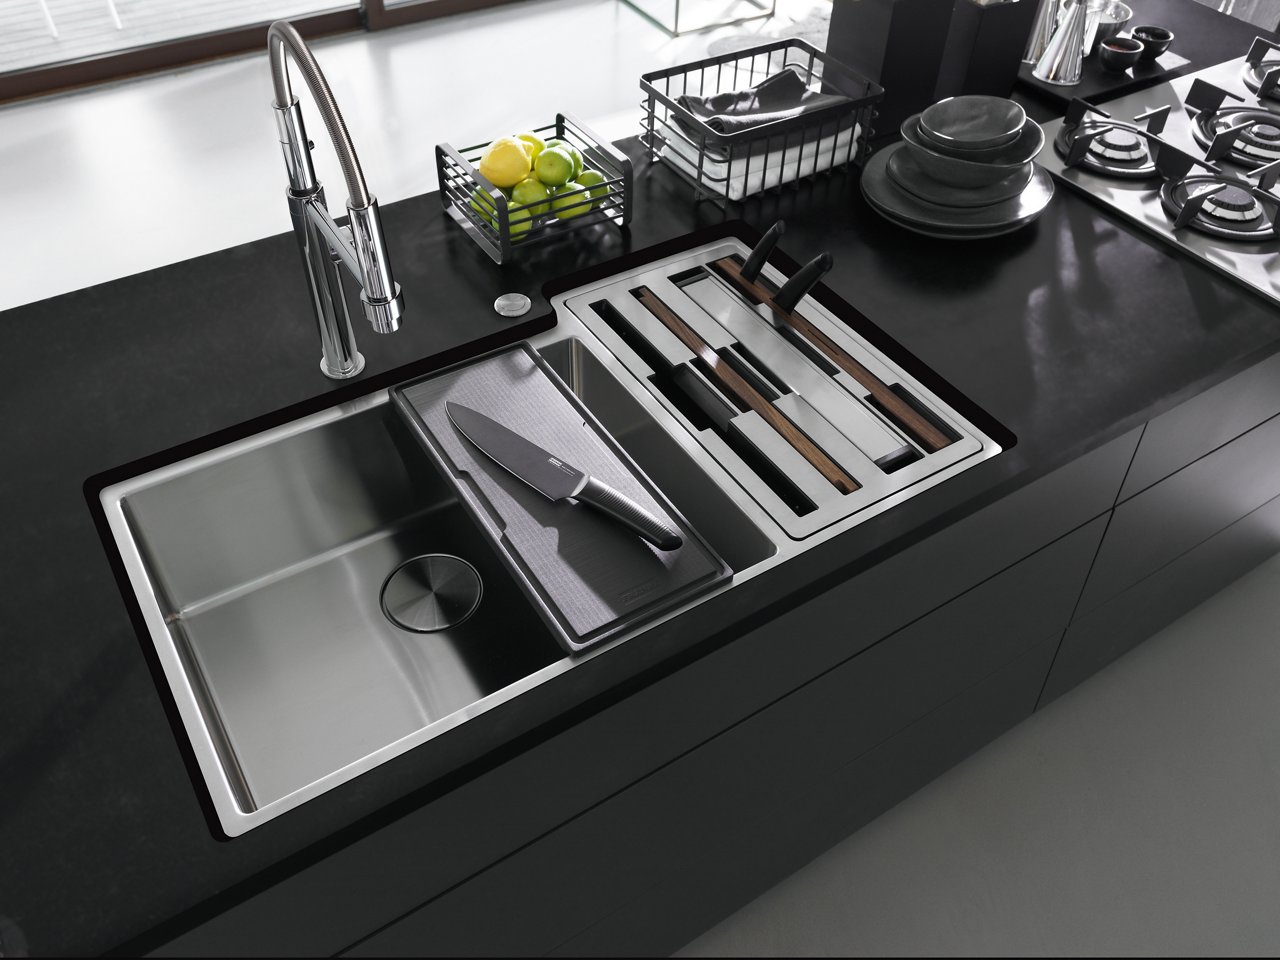 Culinary Center stainless steel workstation sink with built in accessory storage paired with a Pescara faucet in chrome